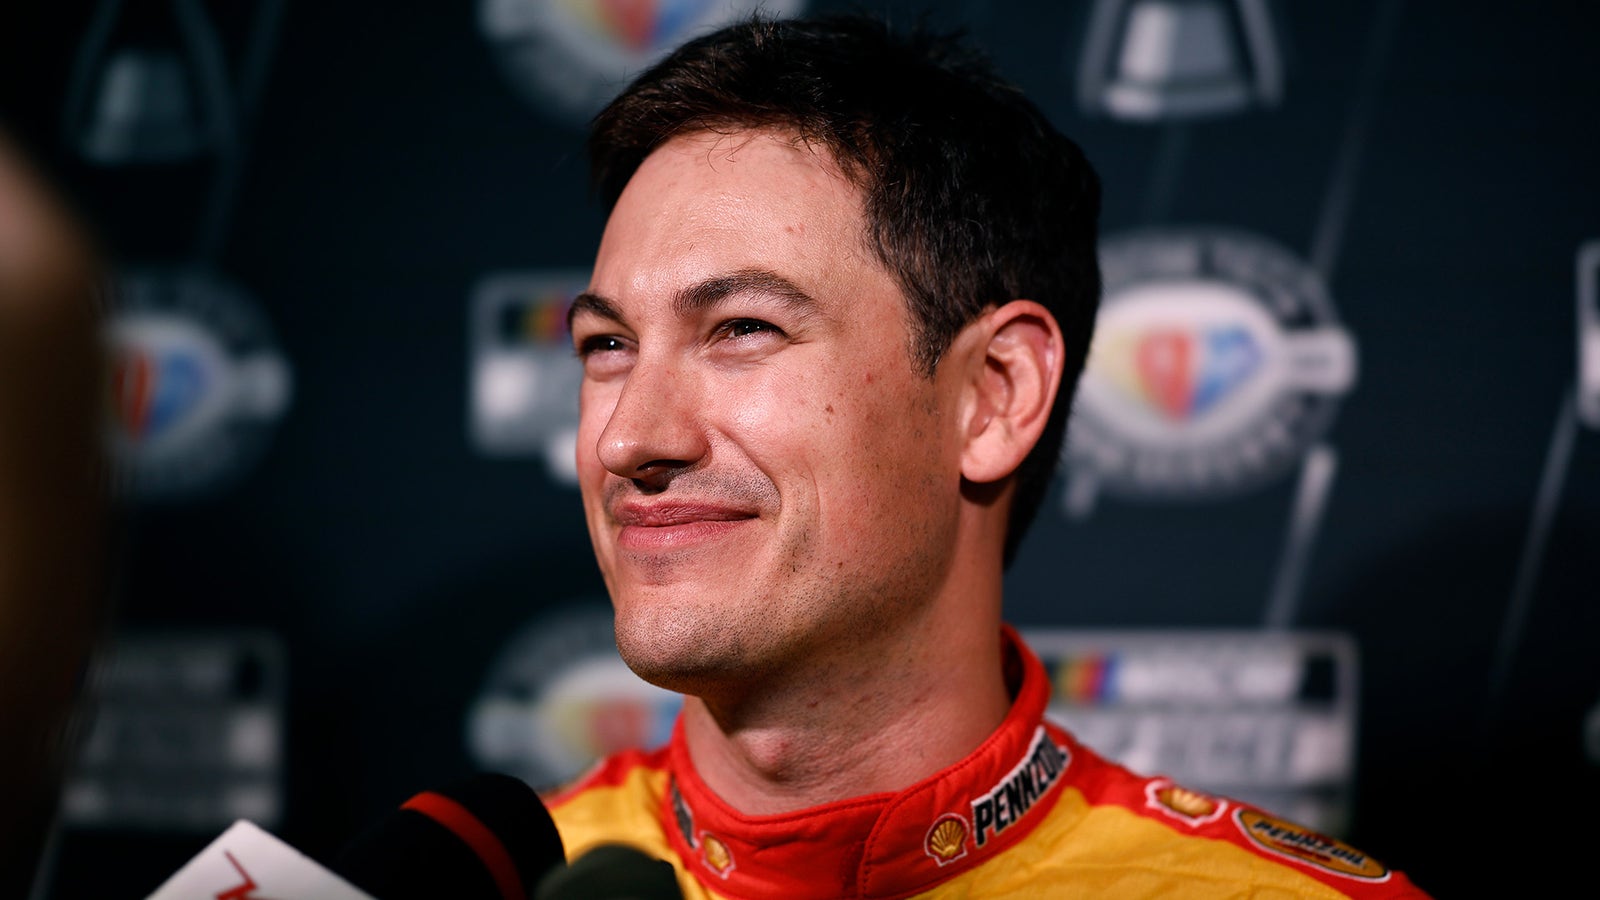 Last year's champ Joey Logano discusses being a playoff underdog